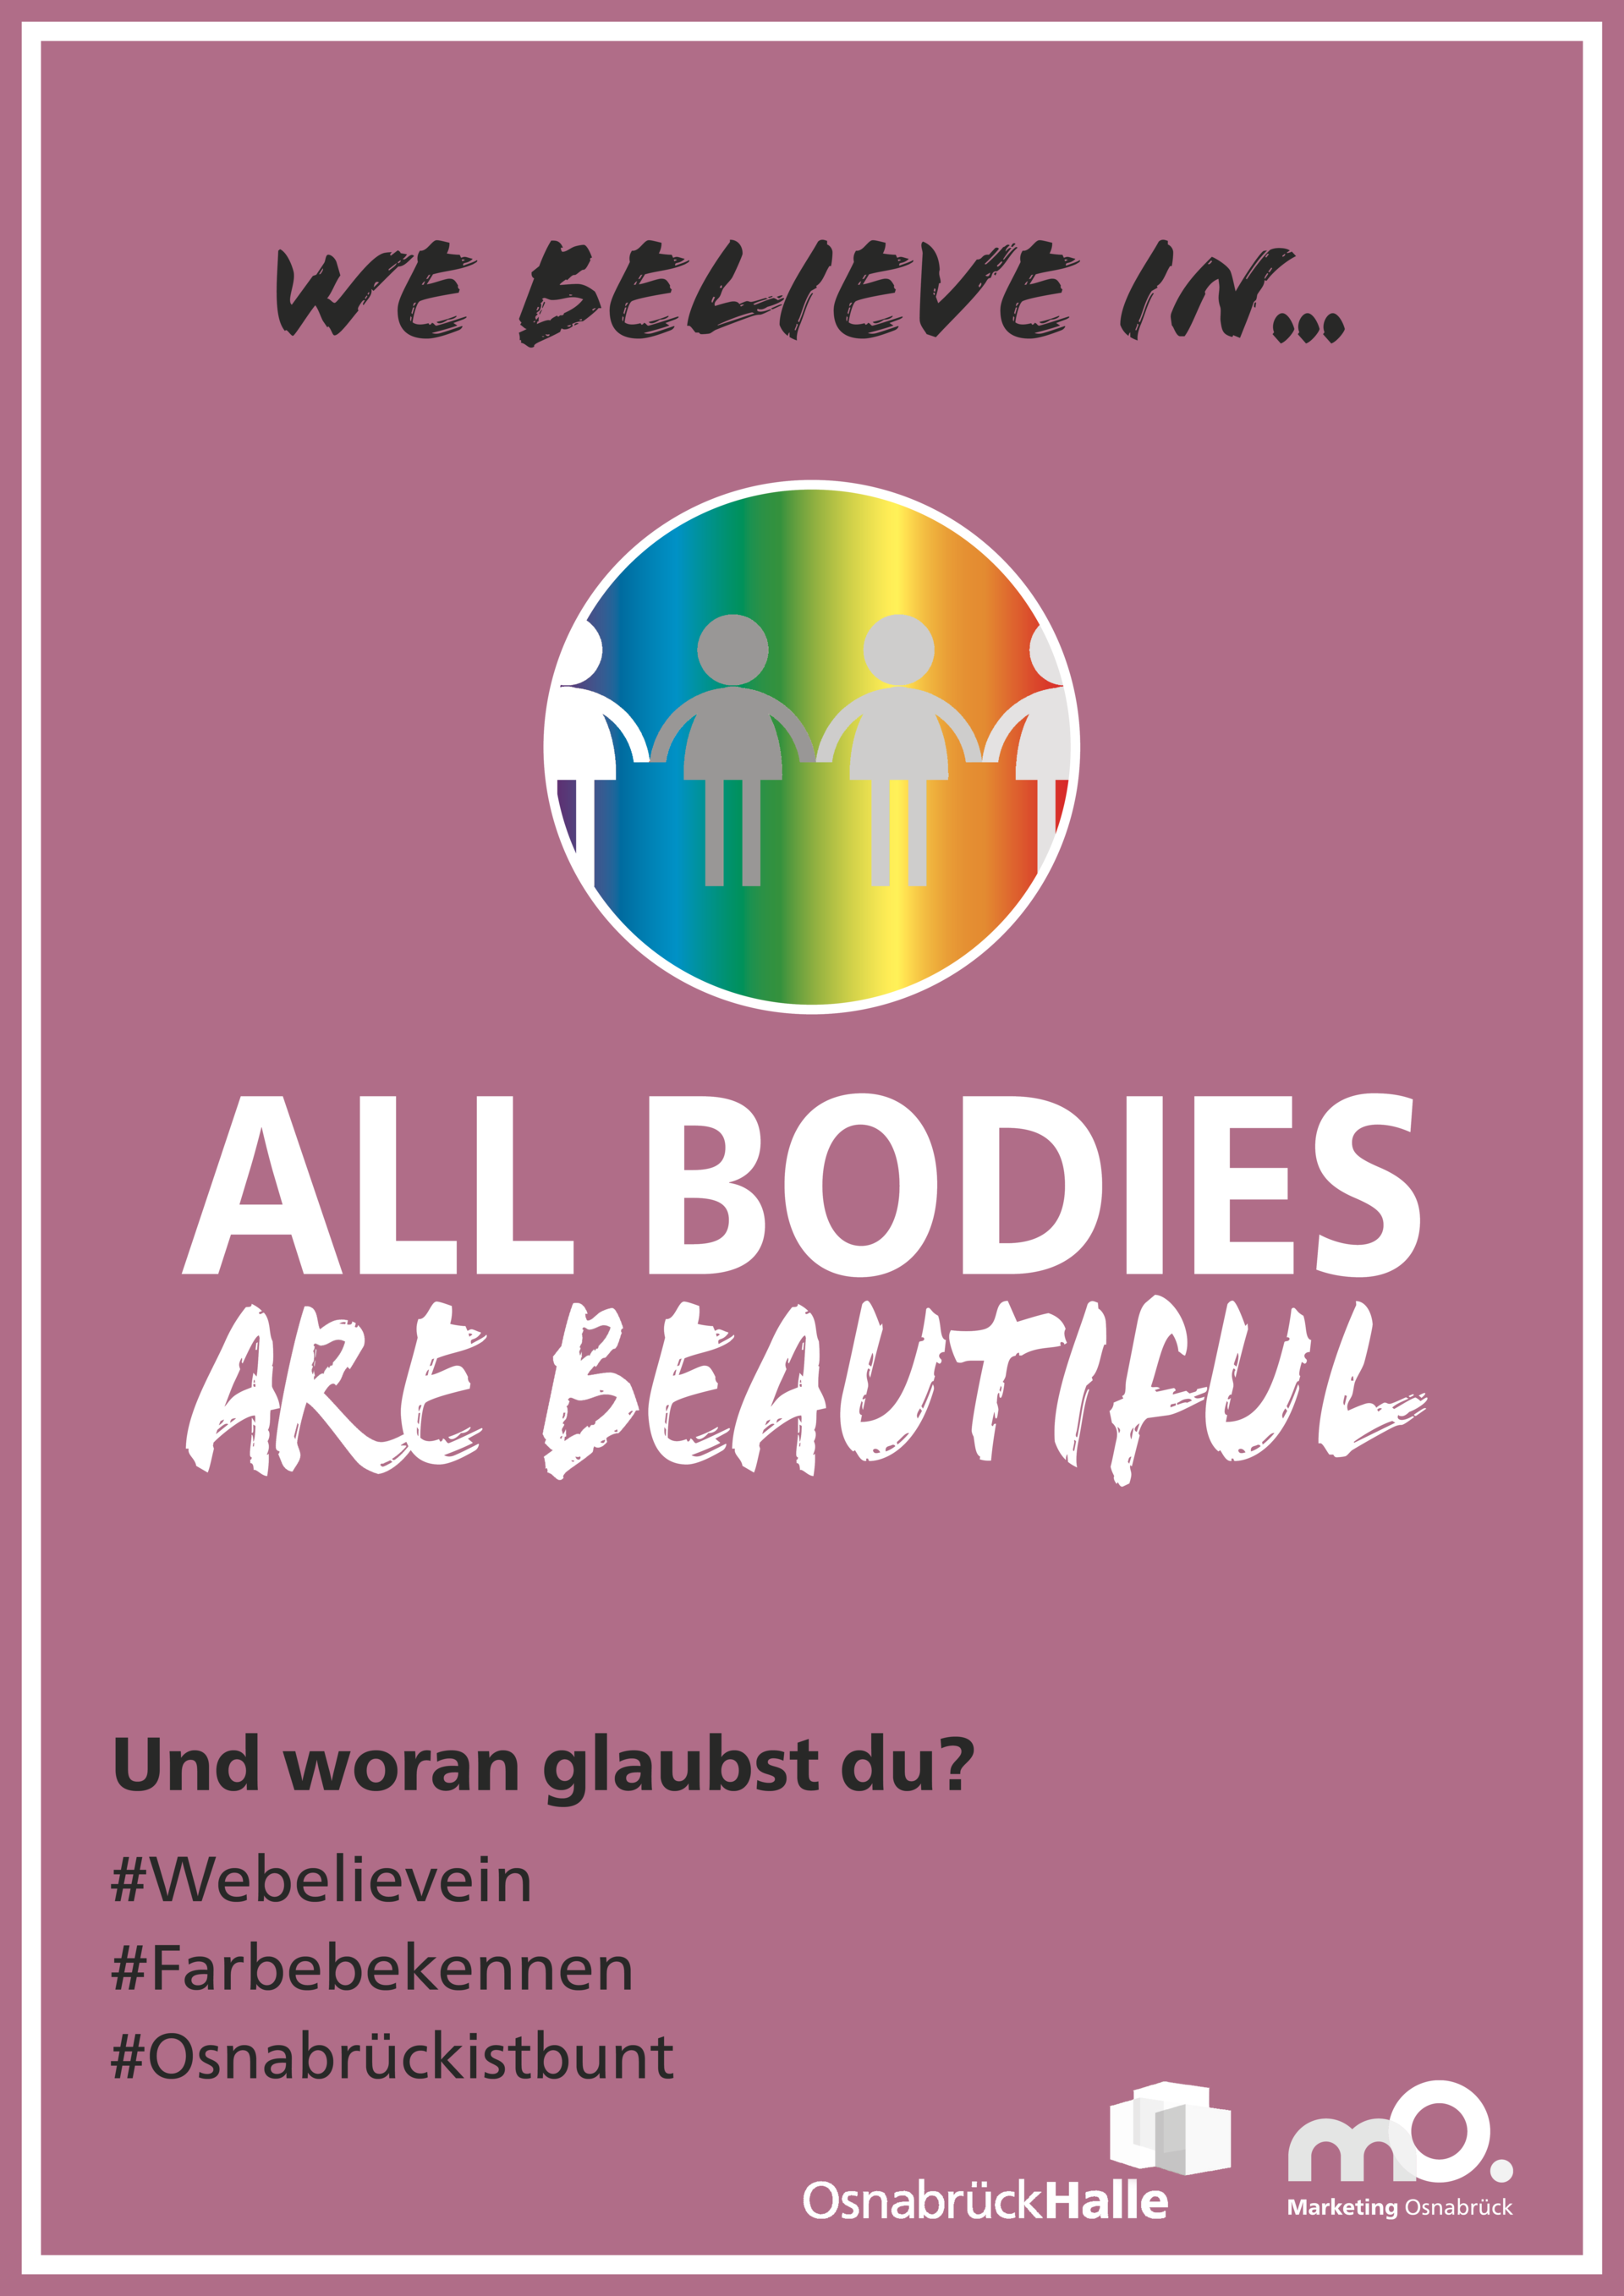 We believe in all bodies are beautiful